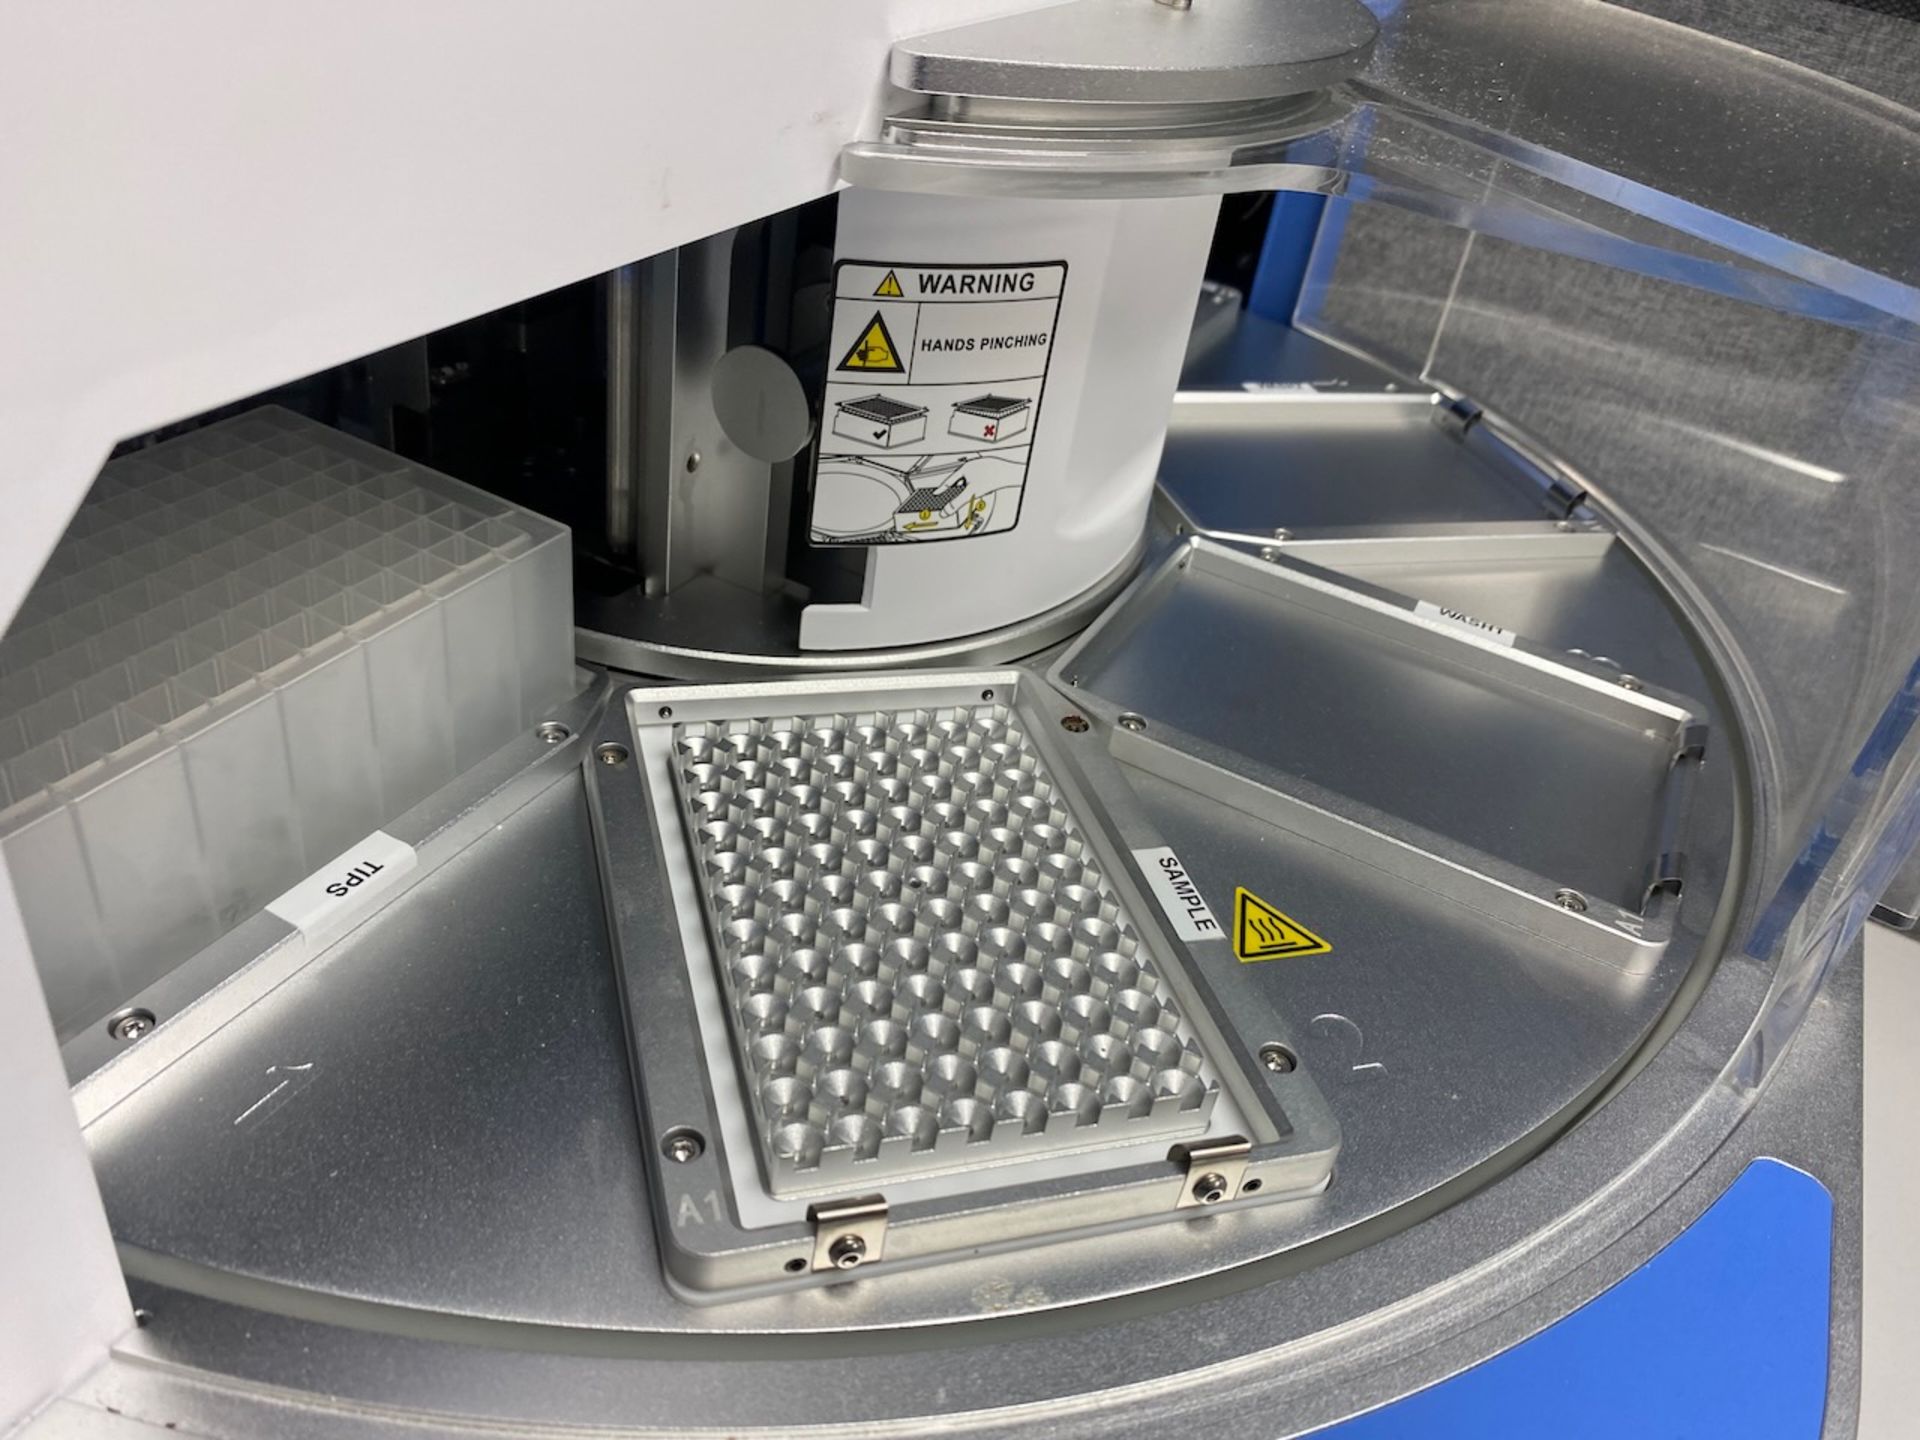 2020 Nucleic Acid Purification System - Image 3 of 5